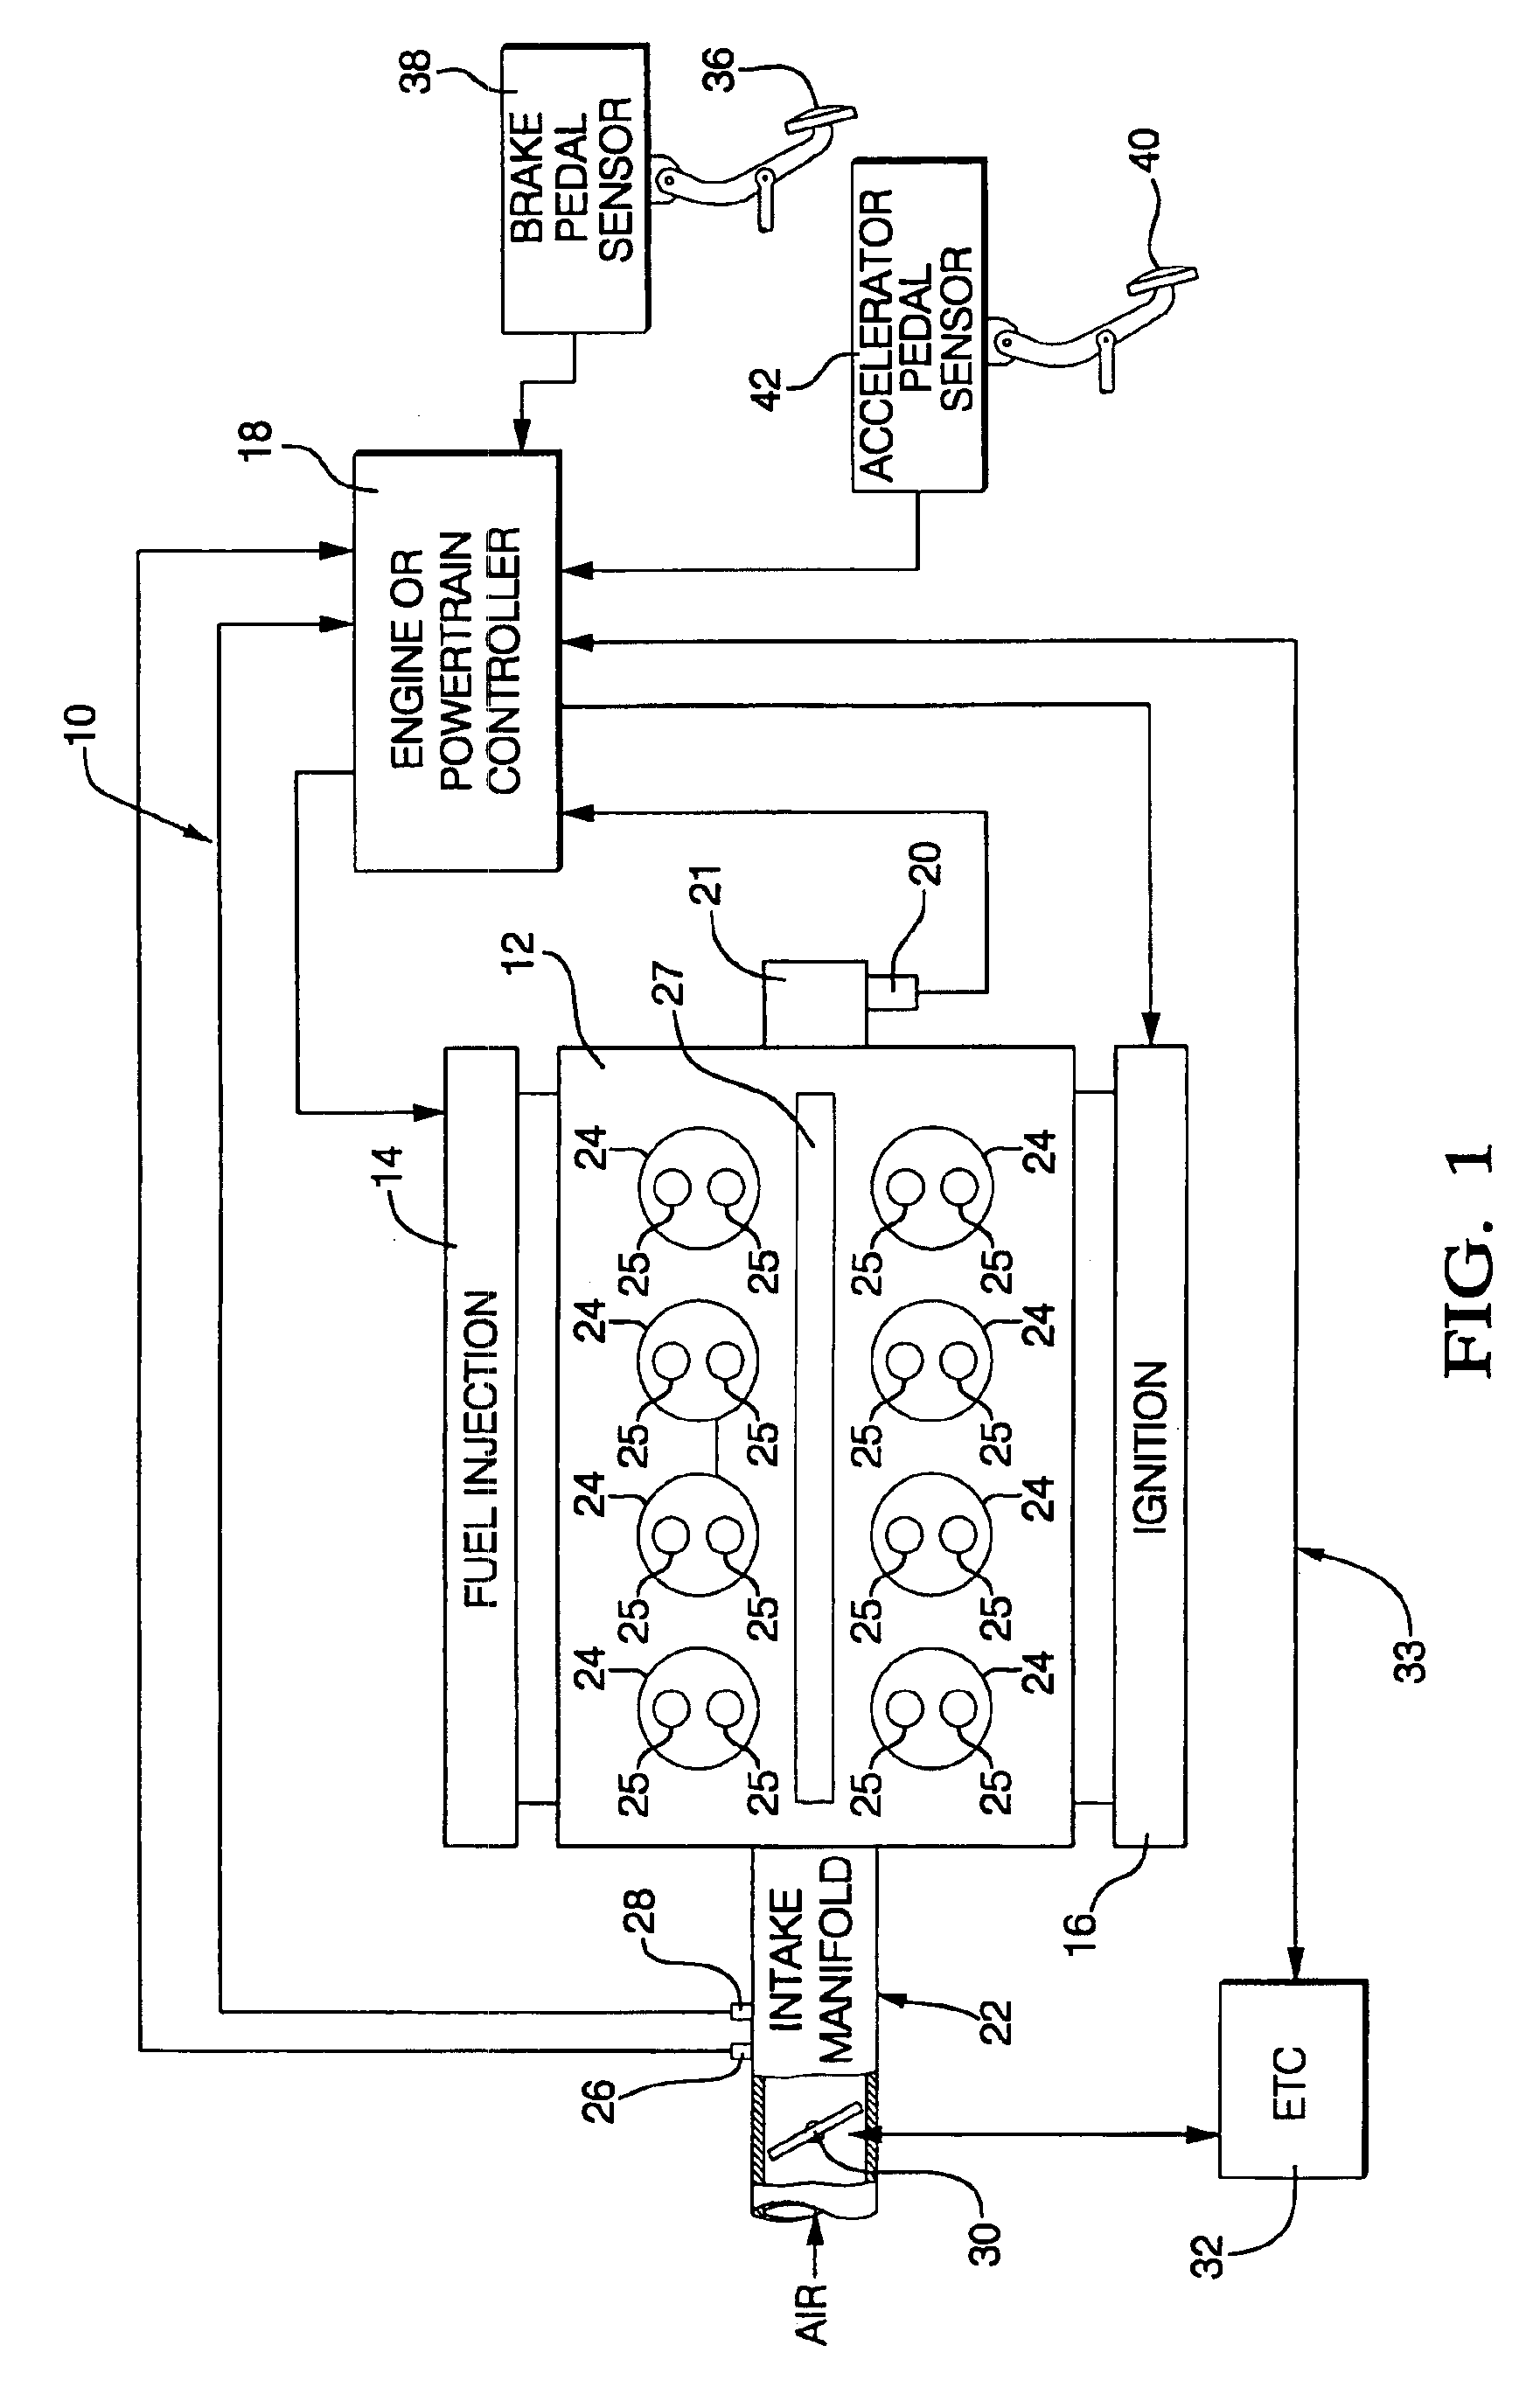 Method and apparatus for a variable displacement internal combustion engine